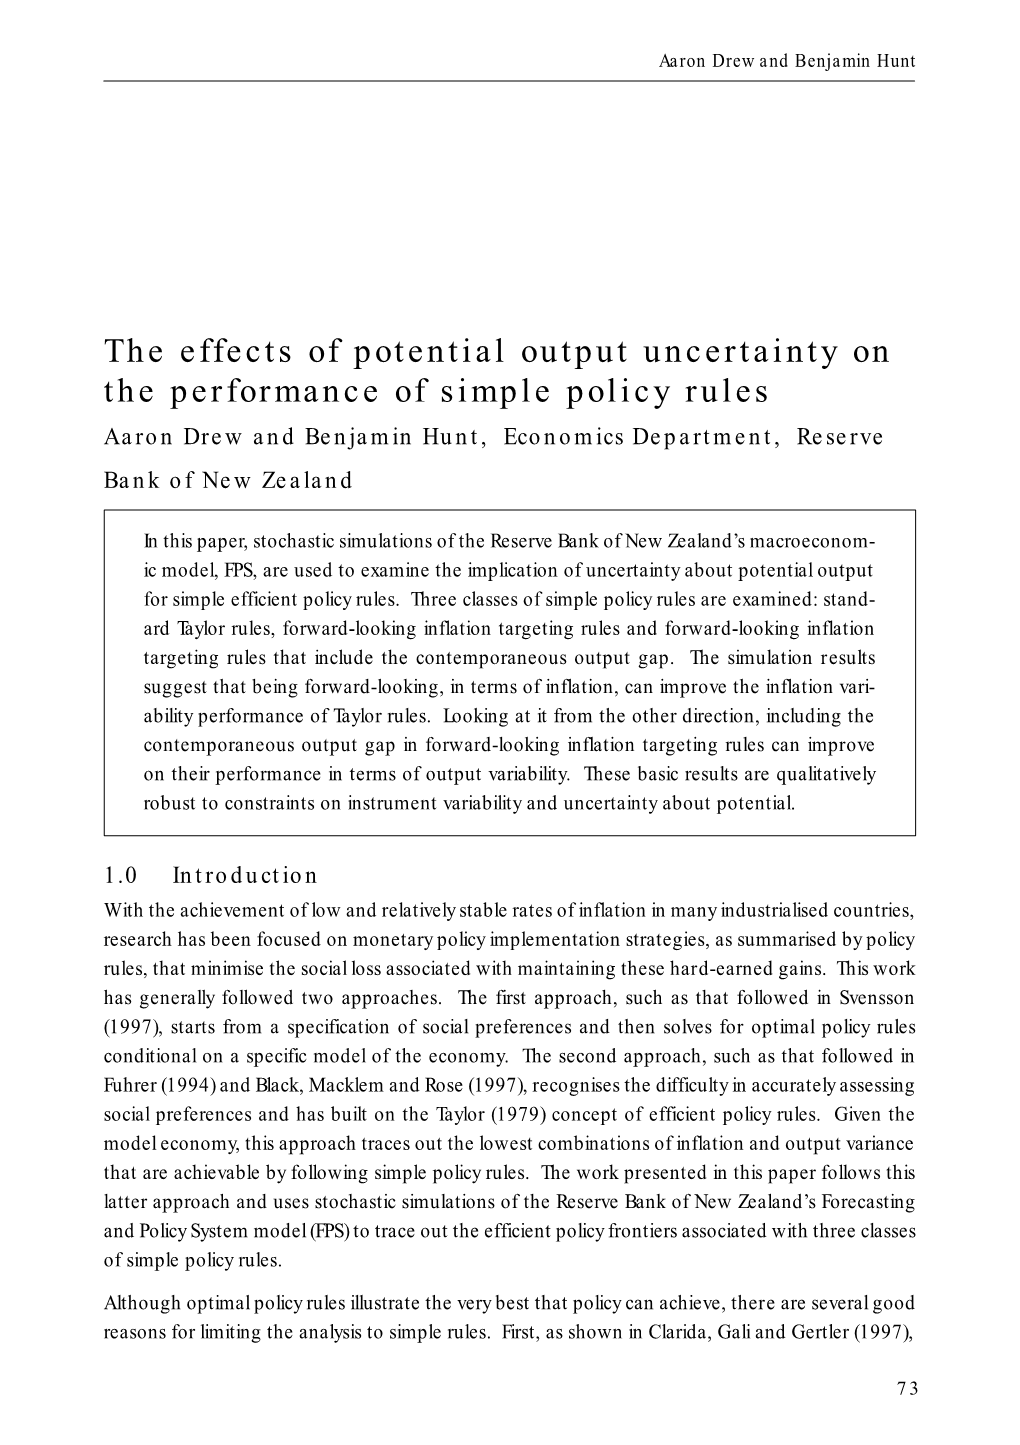 The Effects of Potential Output Uncertainty on the Performance of Simple Policy Rules Aaron Drew and Benjamin Hunt, Economics Department, Reserve Bank of New Zealand